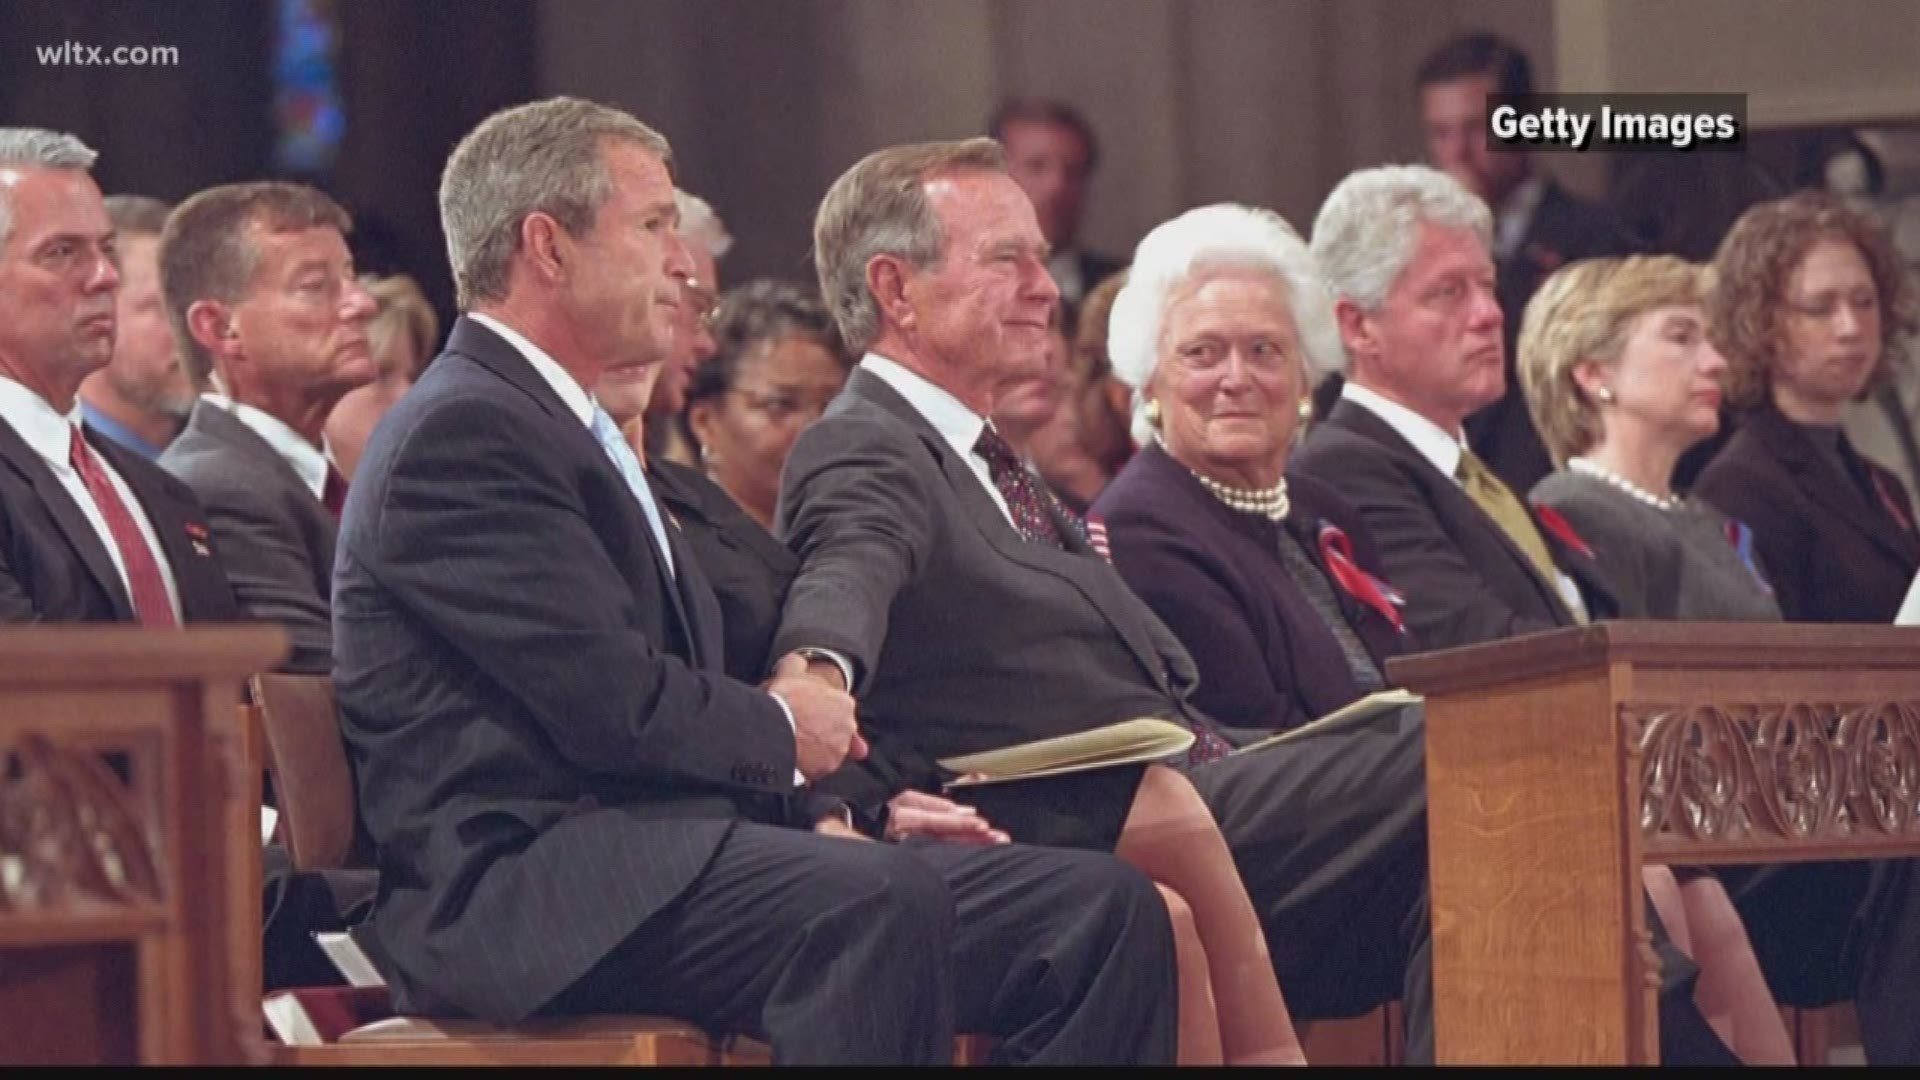 Mary Louise Resch knew the Bush family better than most of us. She worked closely with the family in the 1980's when George H. W. Bush was Vice-President under President Ronald Regan.